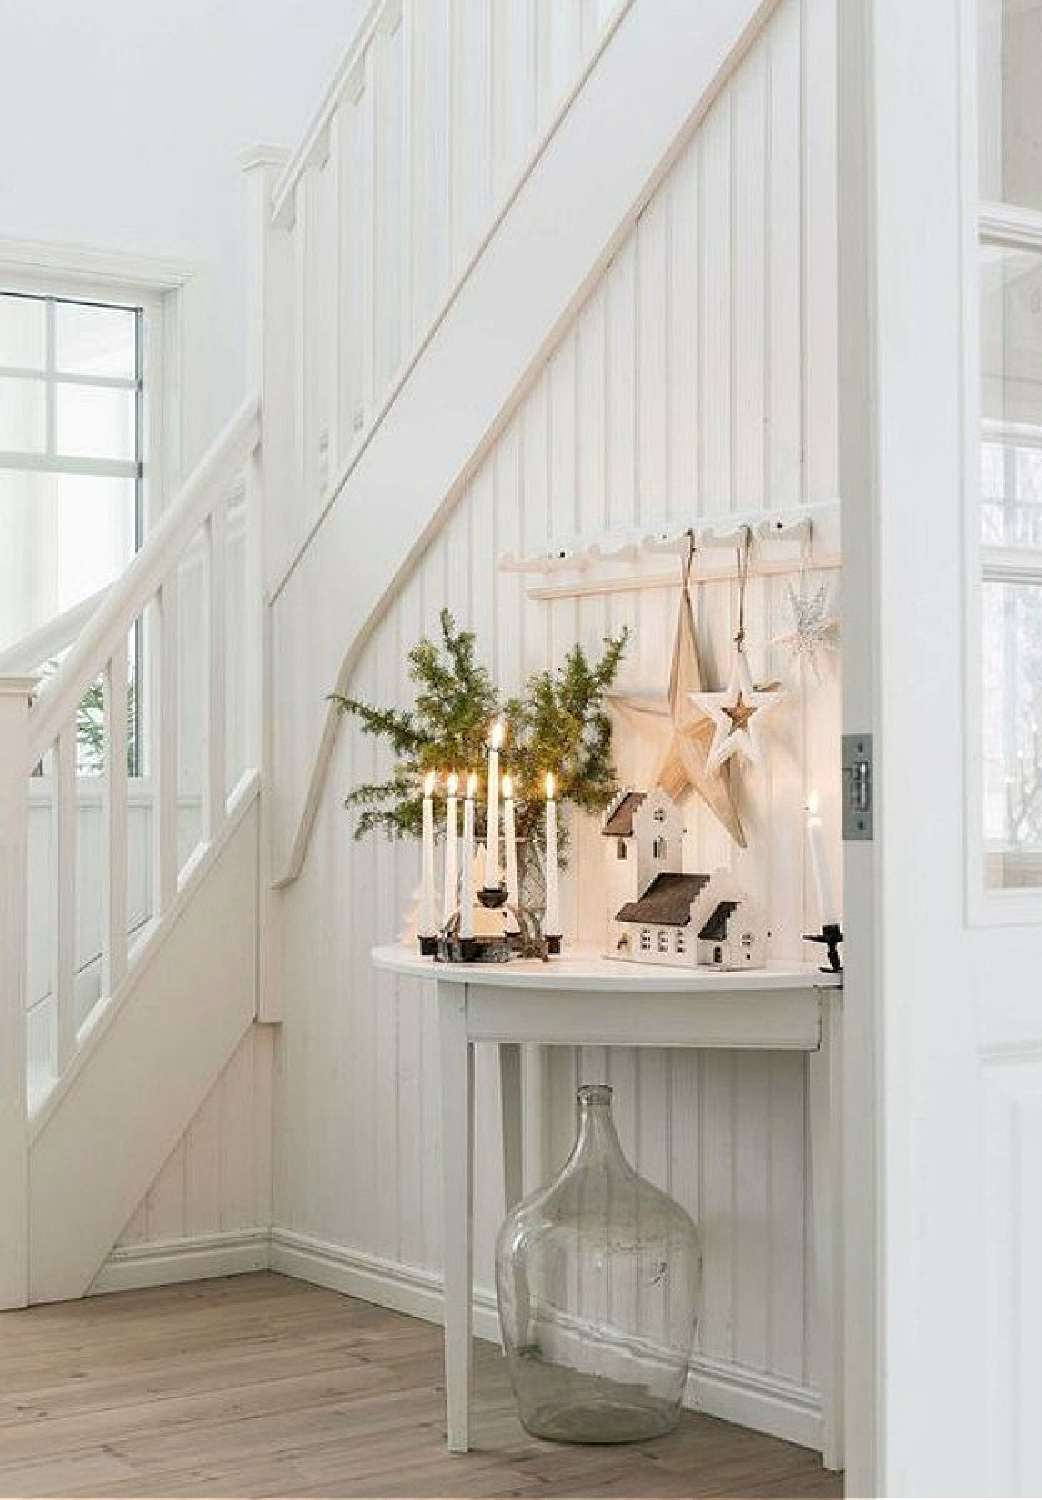 Gorgeous Scandinavian white Christmas decorating in a white cottage style entry with candlelight - Lantliv. #whitechristmasdecor #scandichristmas